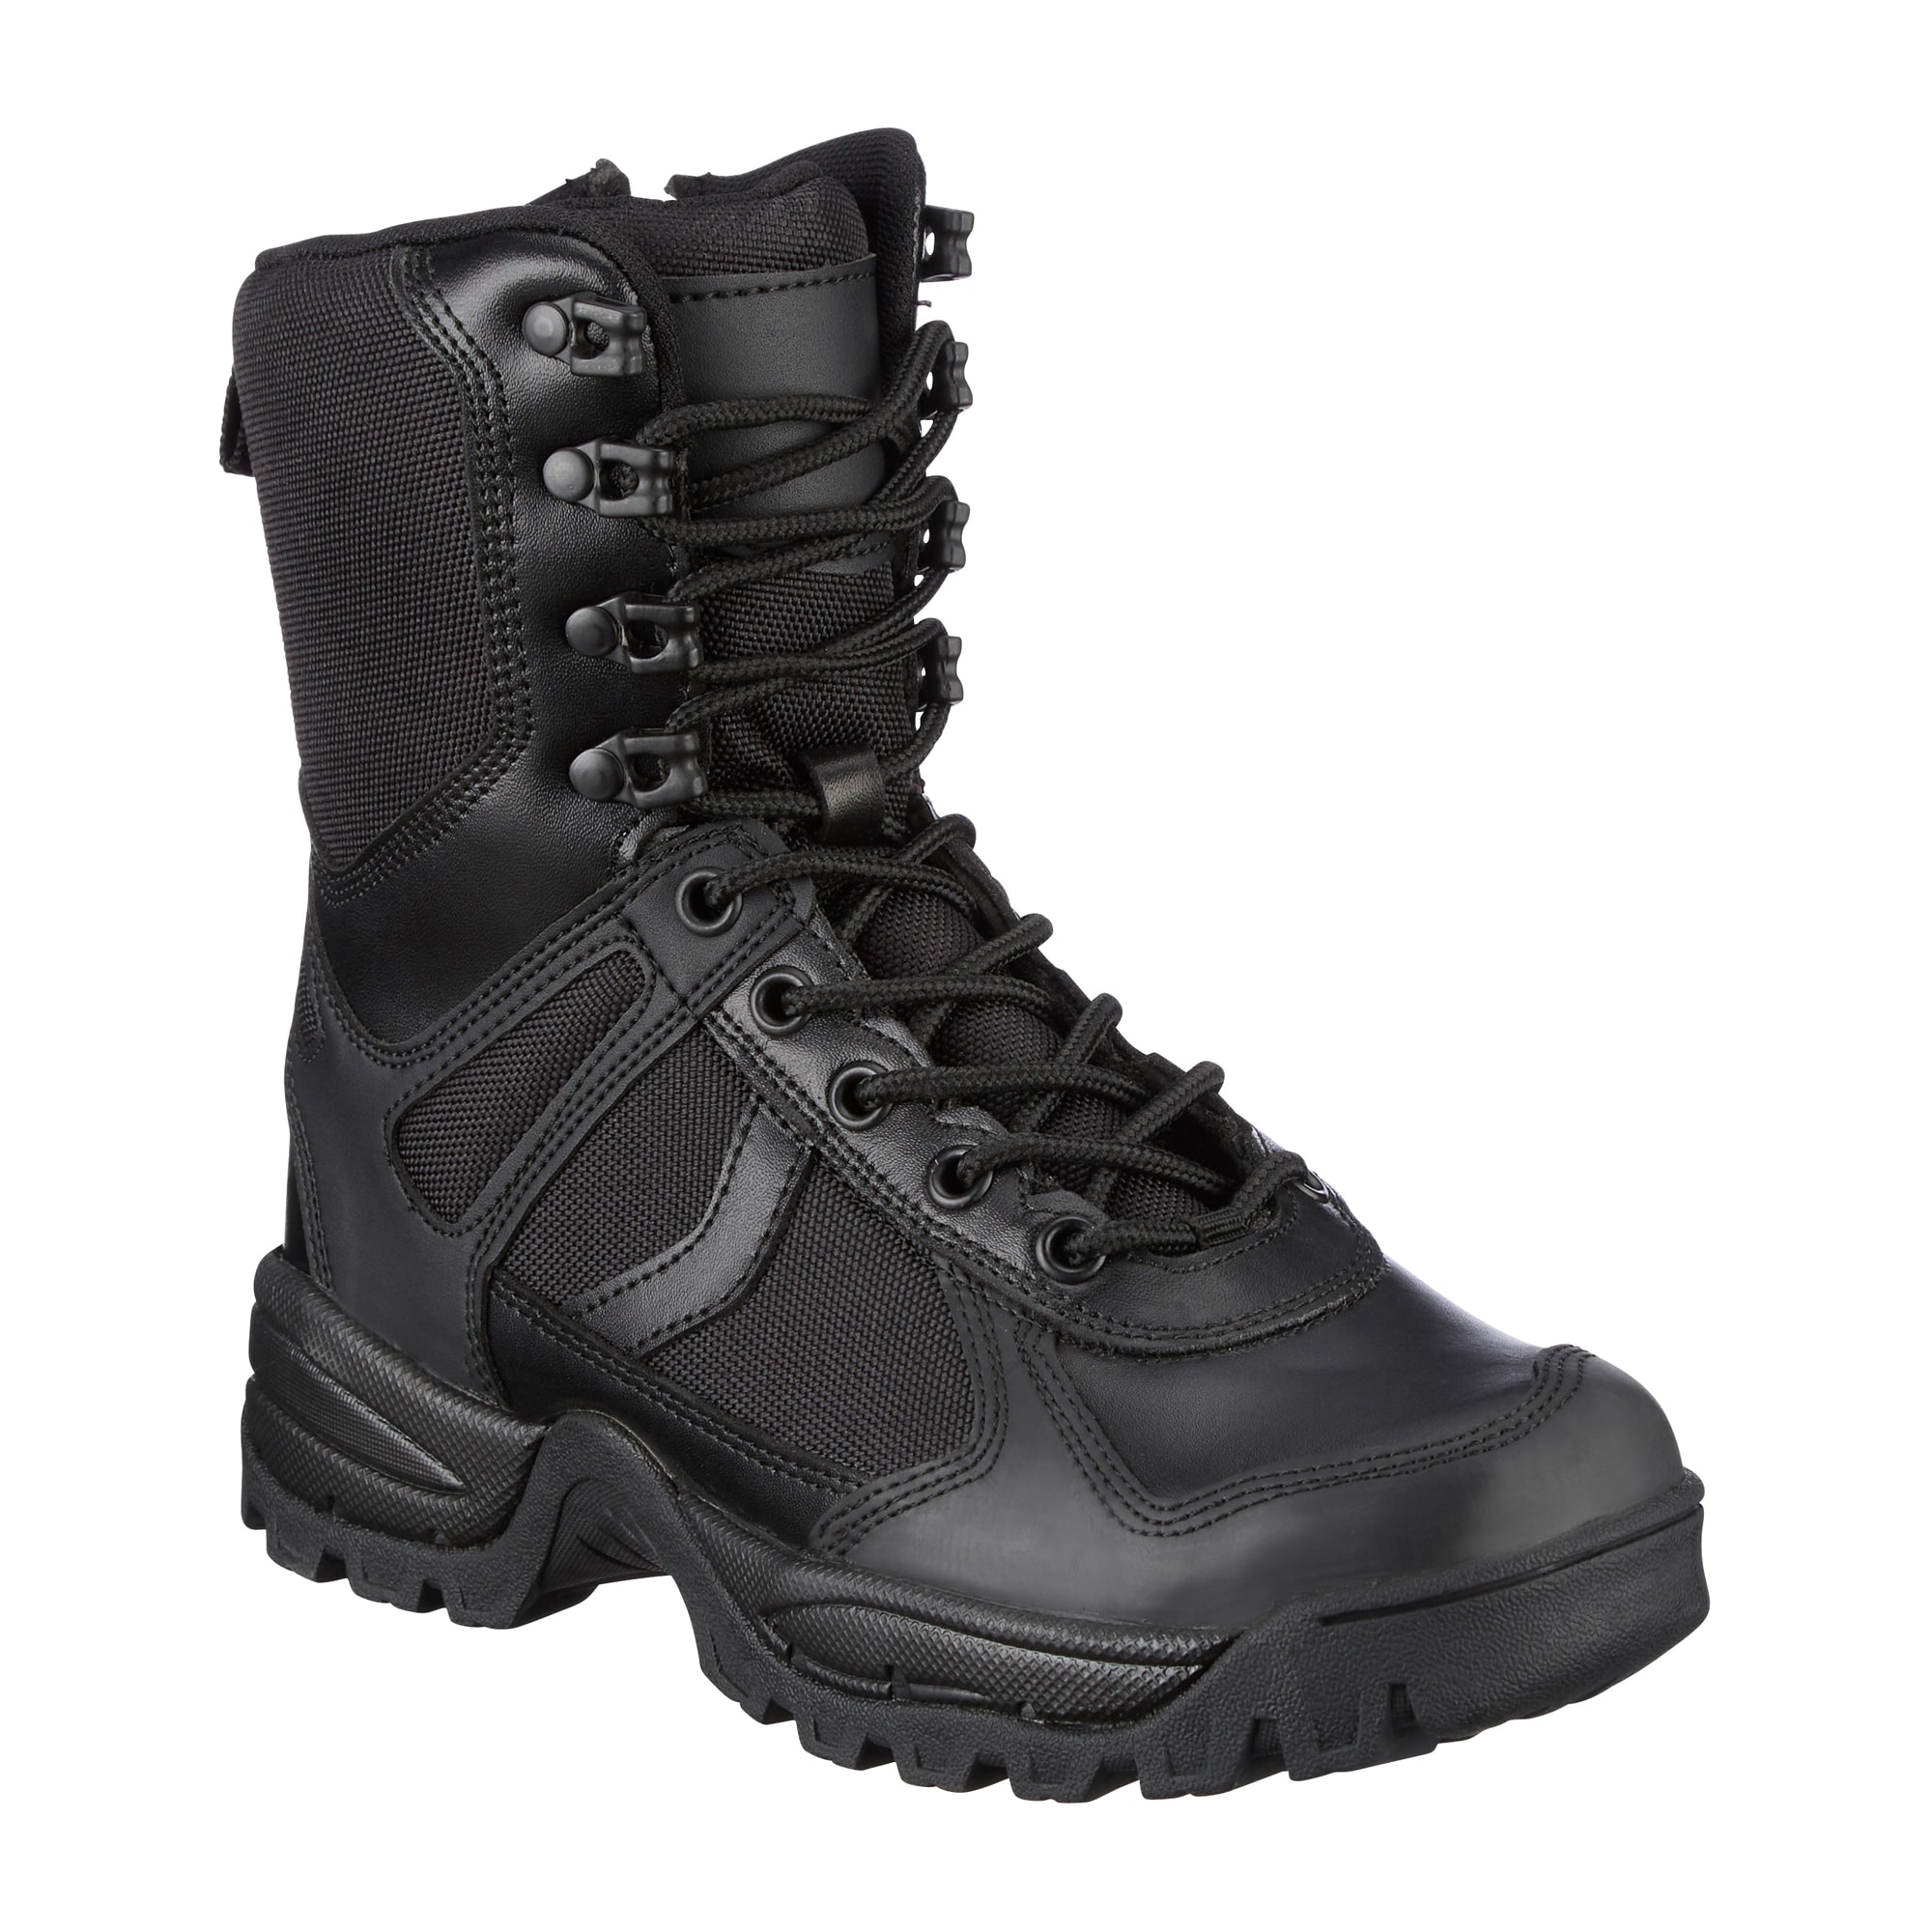 Boots Patrol Zip black | Boots Patrol Zip black | Other Boots | Boots ...